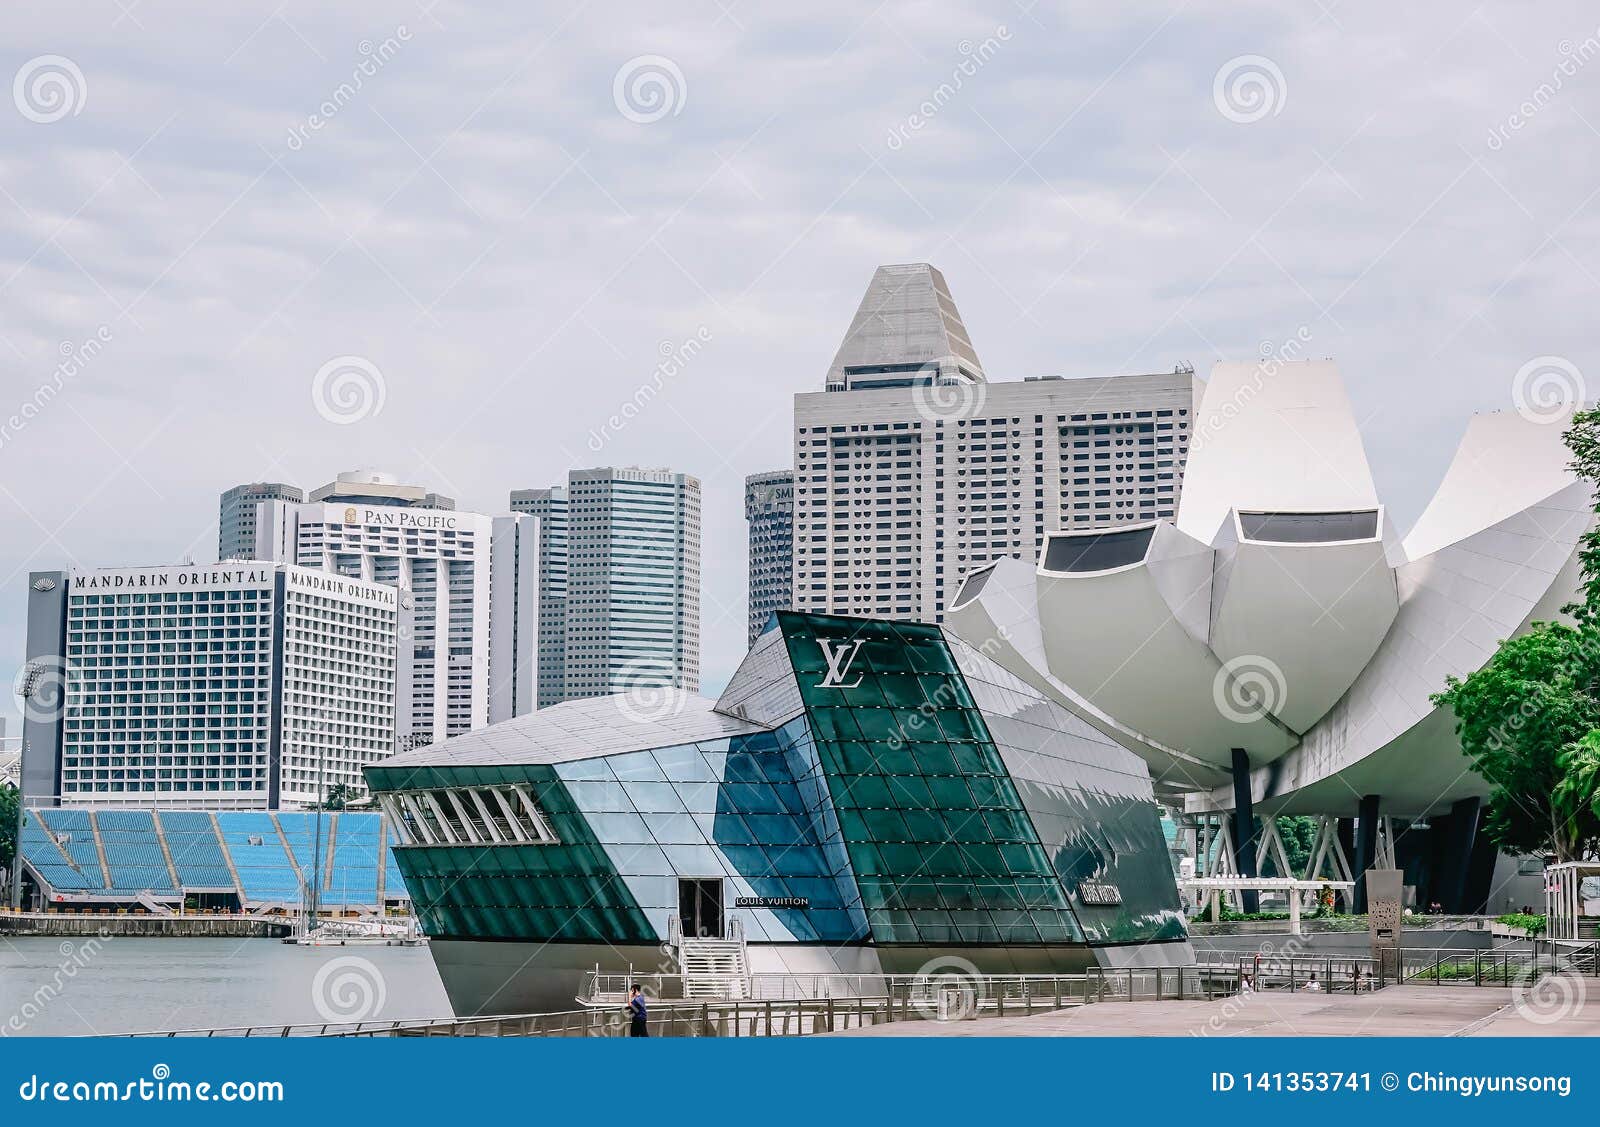 Louis Vuitton Island Maison The Shoppes At Marina Bay Sands Is Shopping Center Famous In ...